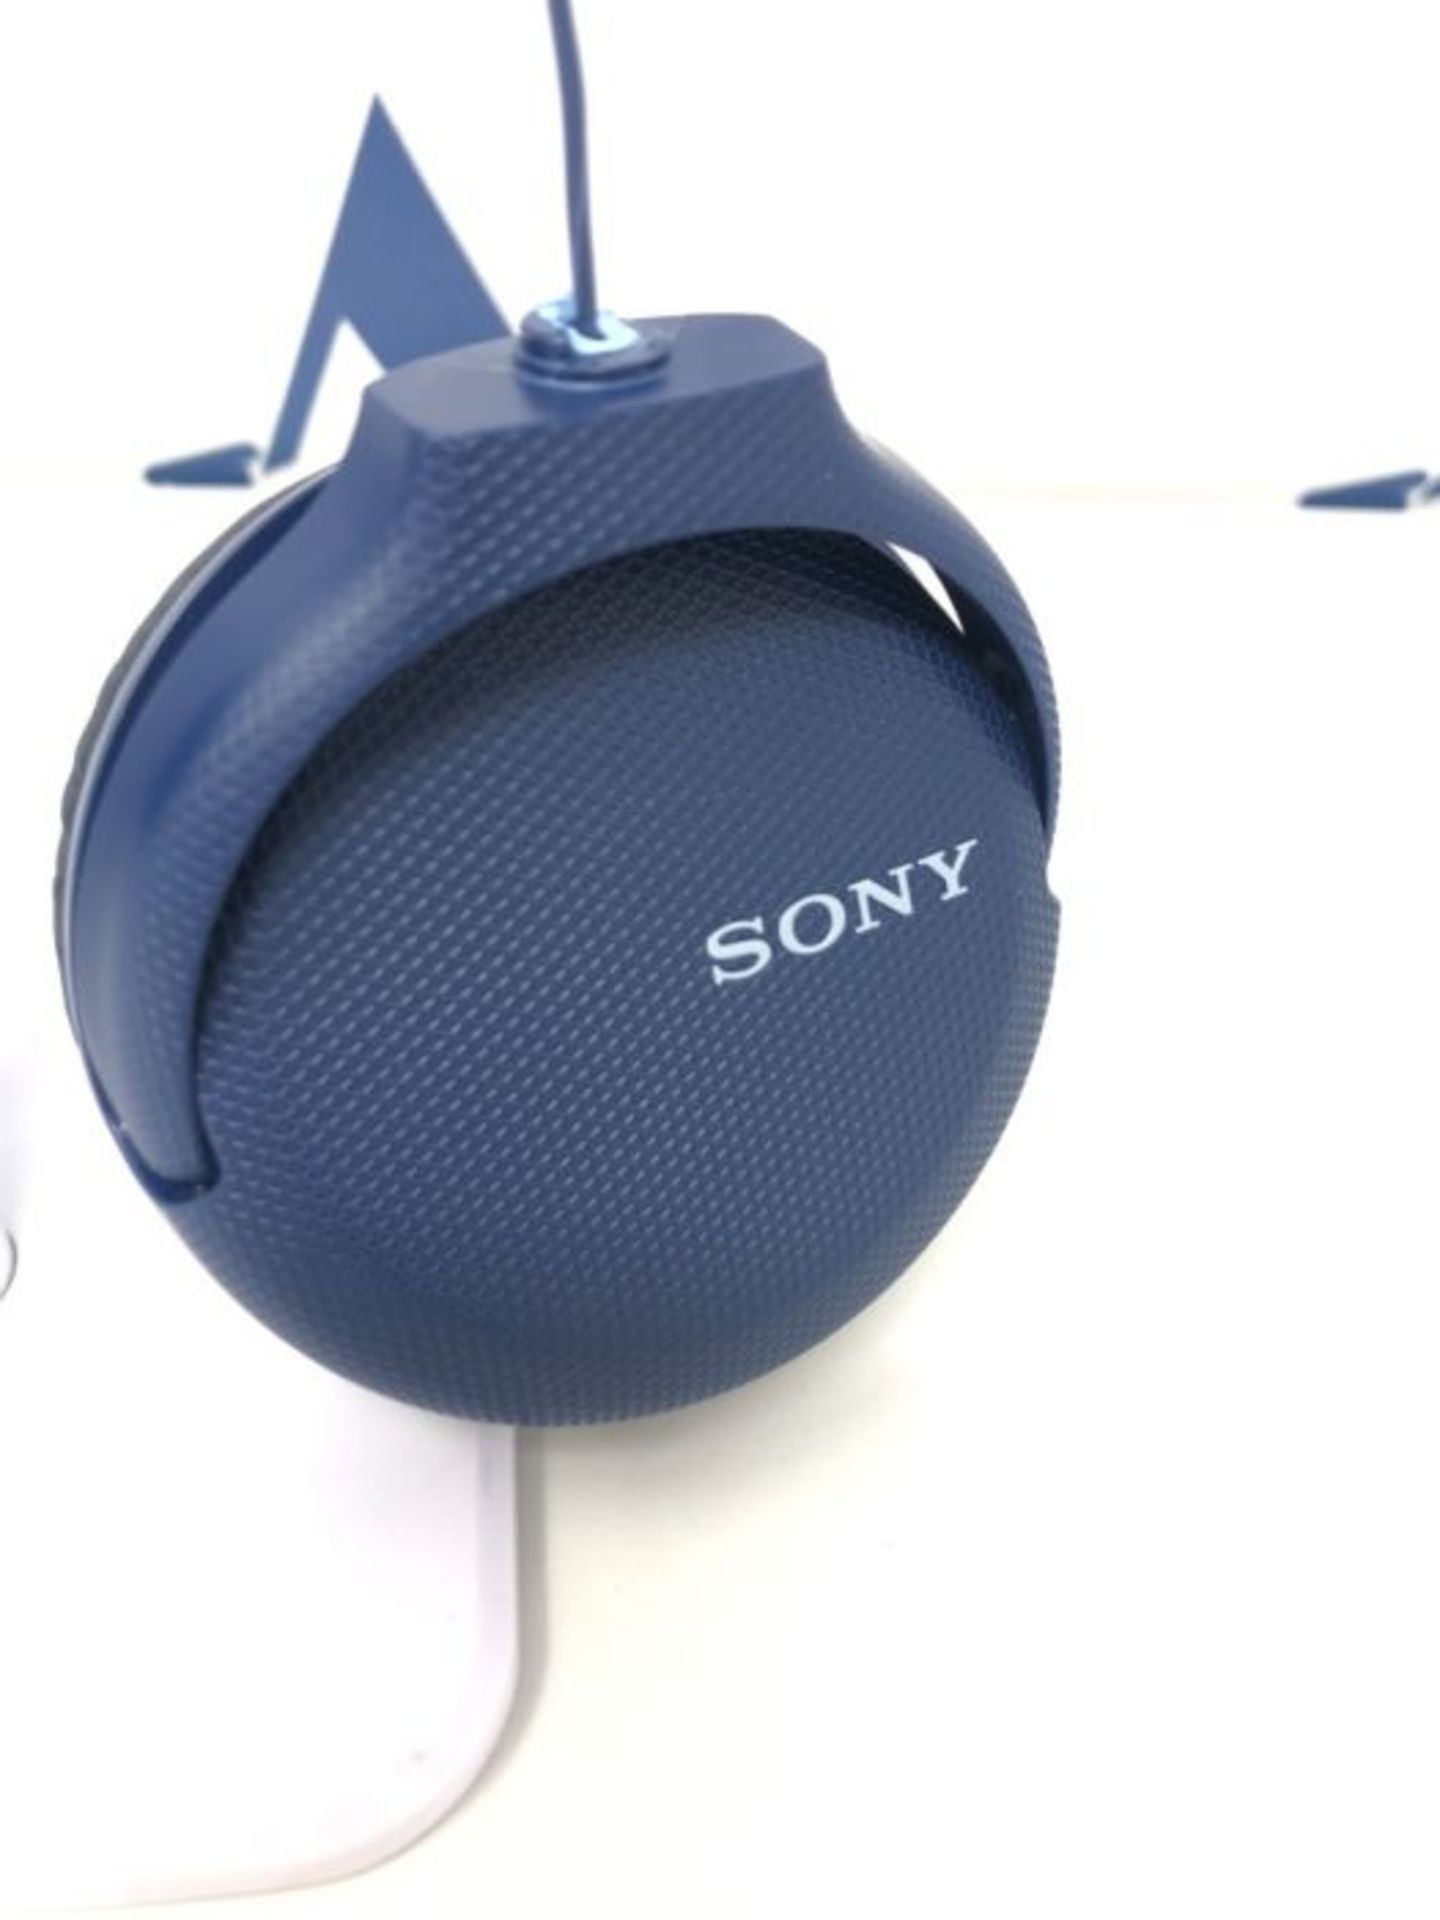 [CRACKED] Sony WH-CH510 Wireless Bluetooth Headphones with Mic, 35 Hours Battery Life - Image 3 of 3